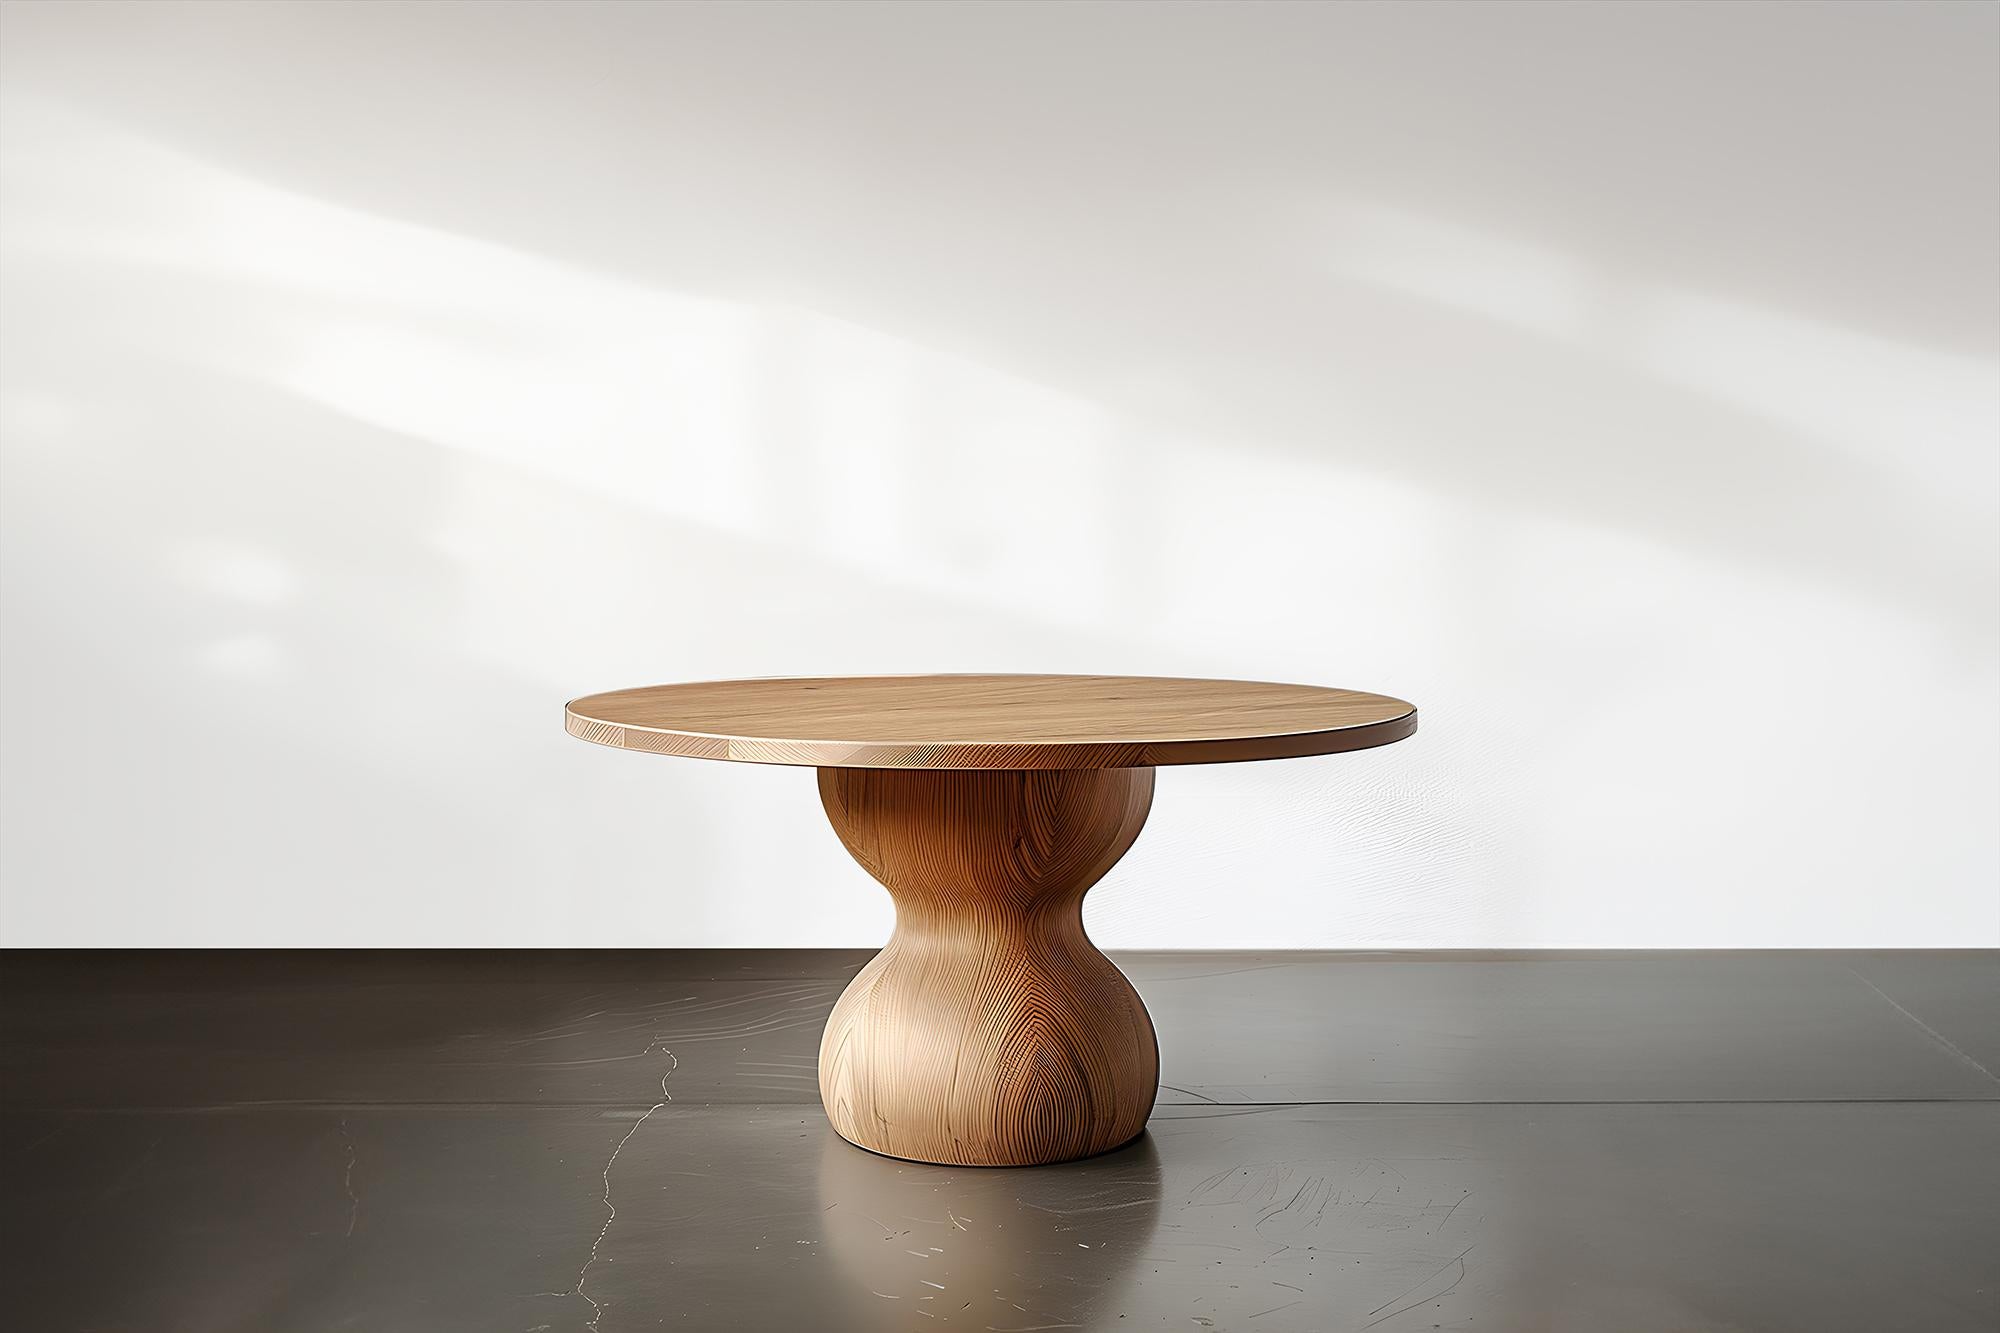 Game Time in Style No10, Socle Game Tables, Solid Wood by NONO

——

Introducing the 